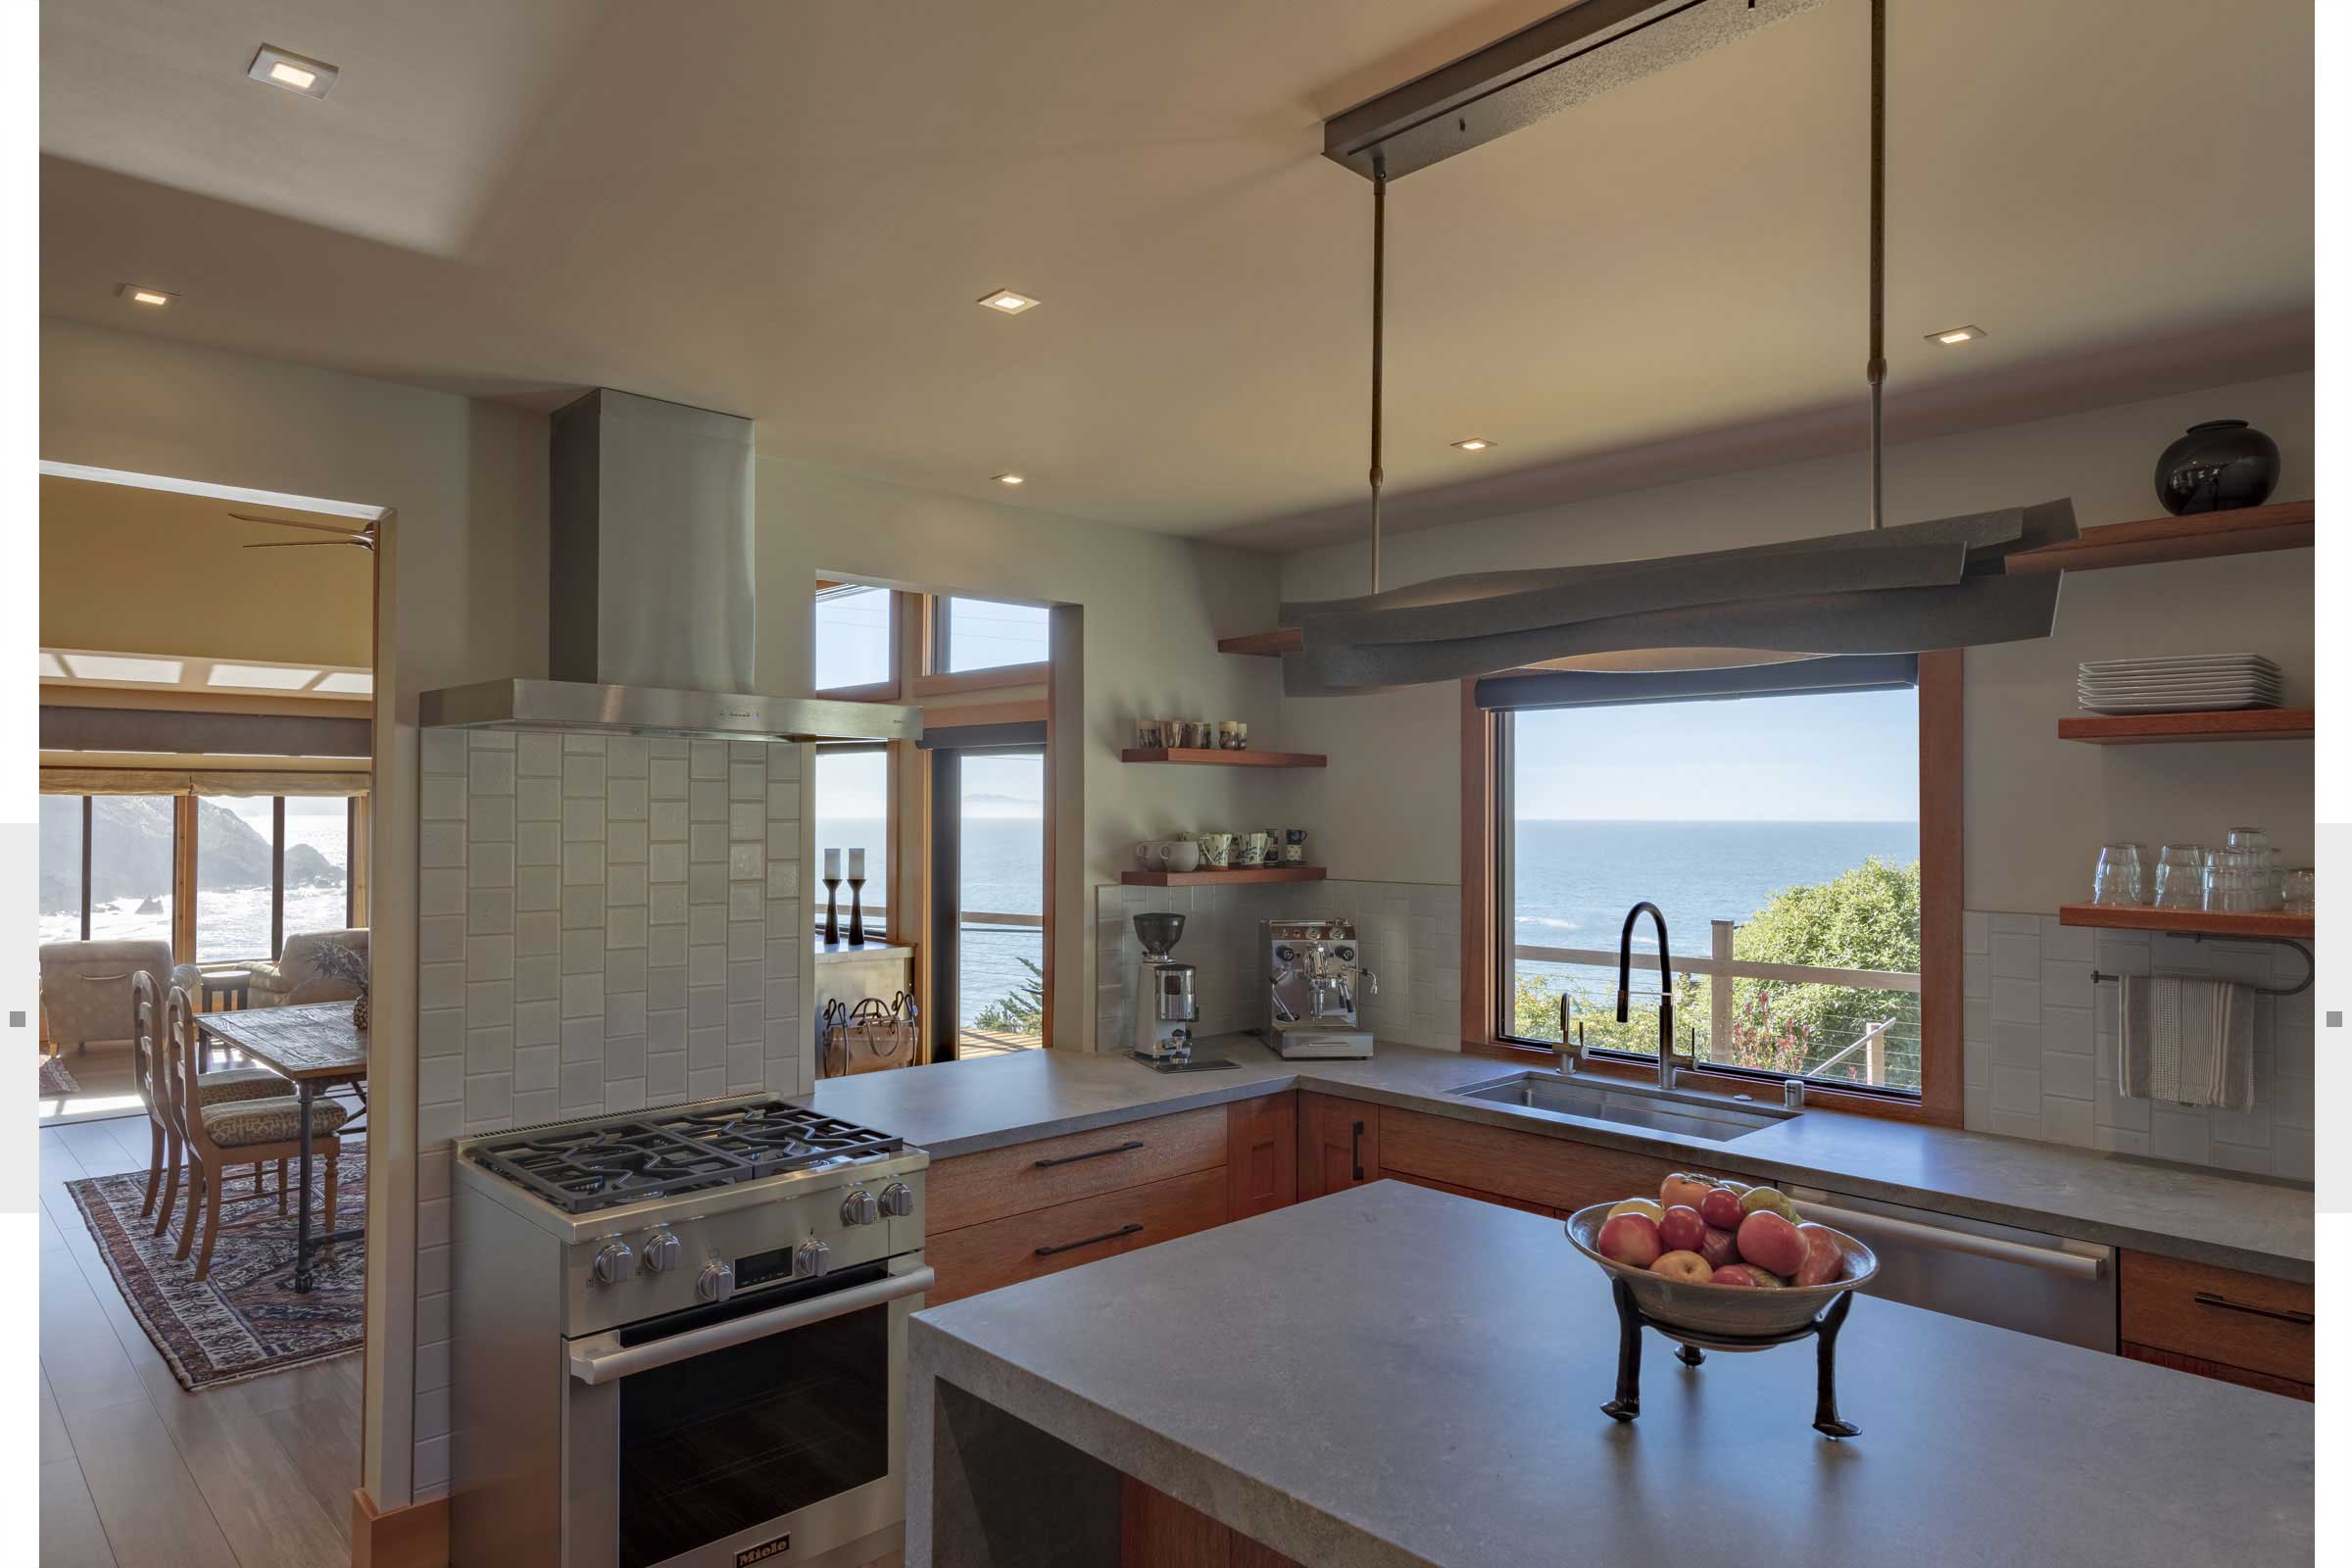 kitchen with custom light fixtures and kitchen details with view of ocean